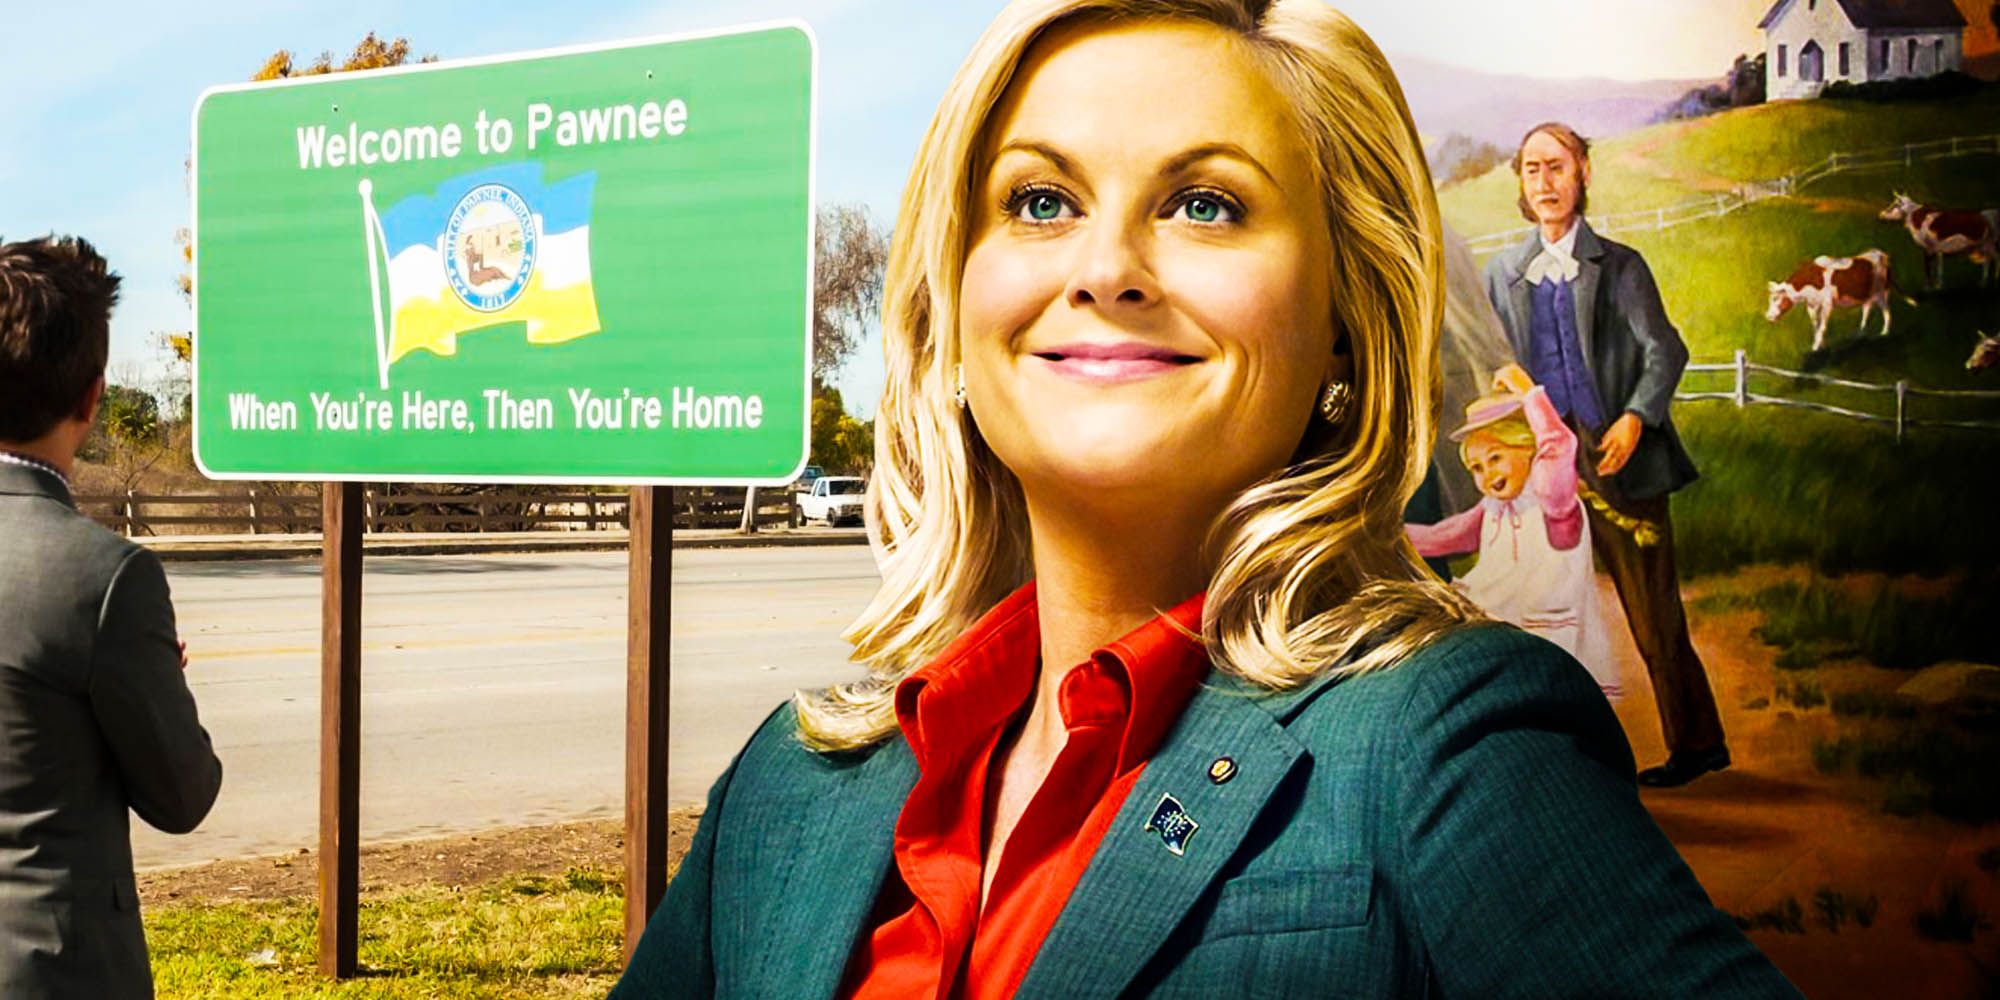 Parks & Rec Pawnees Name Origin Explained (& What It Was Meant To Be)